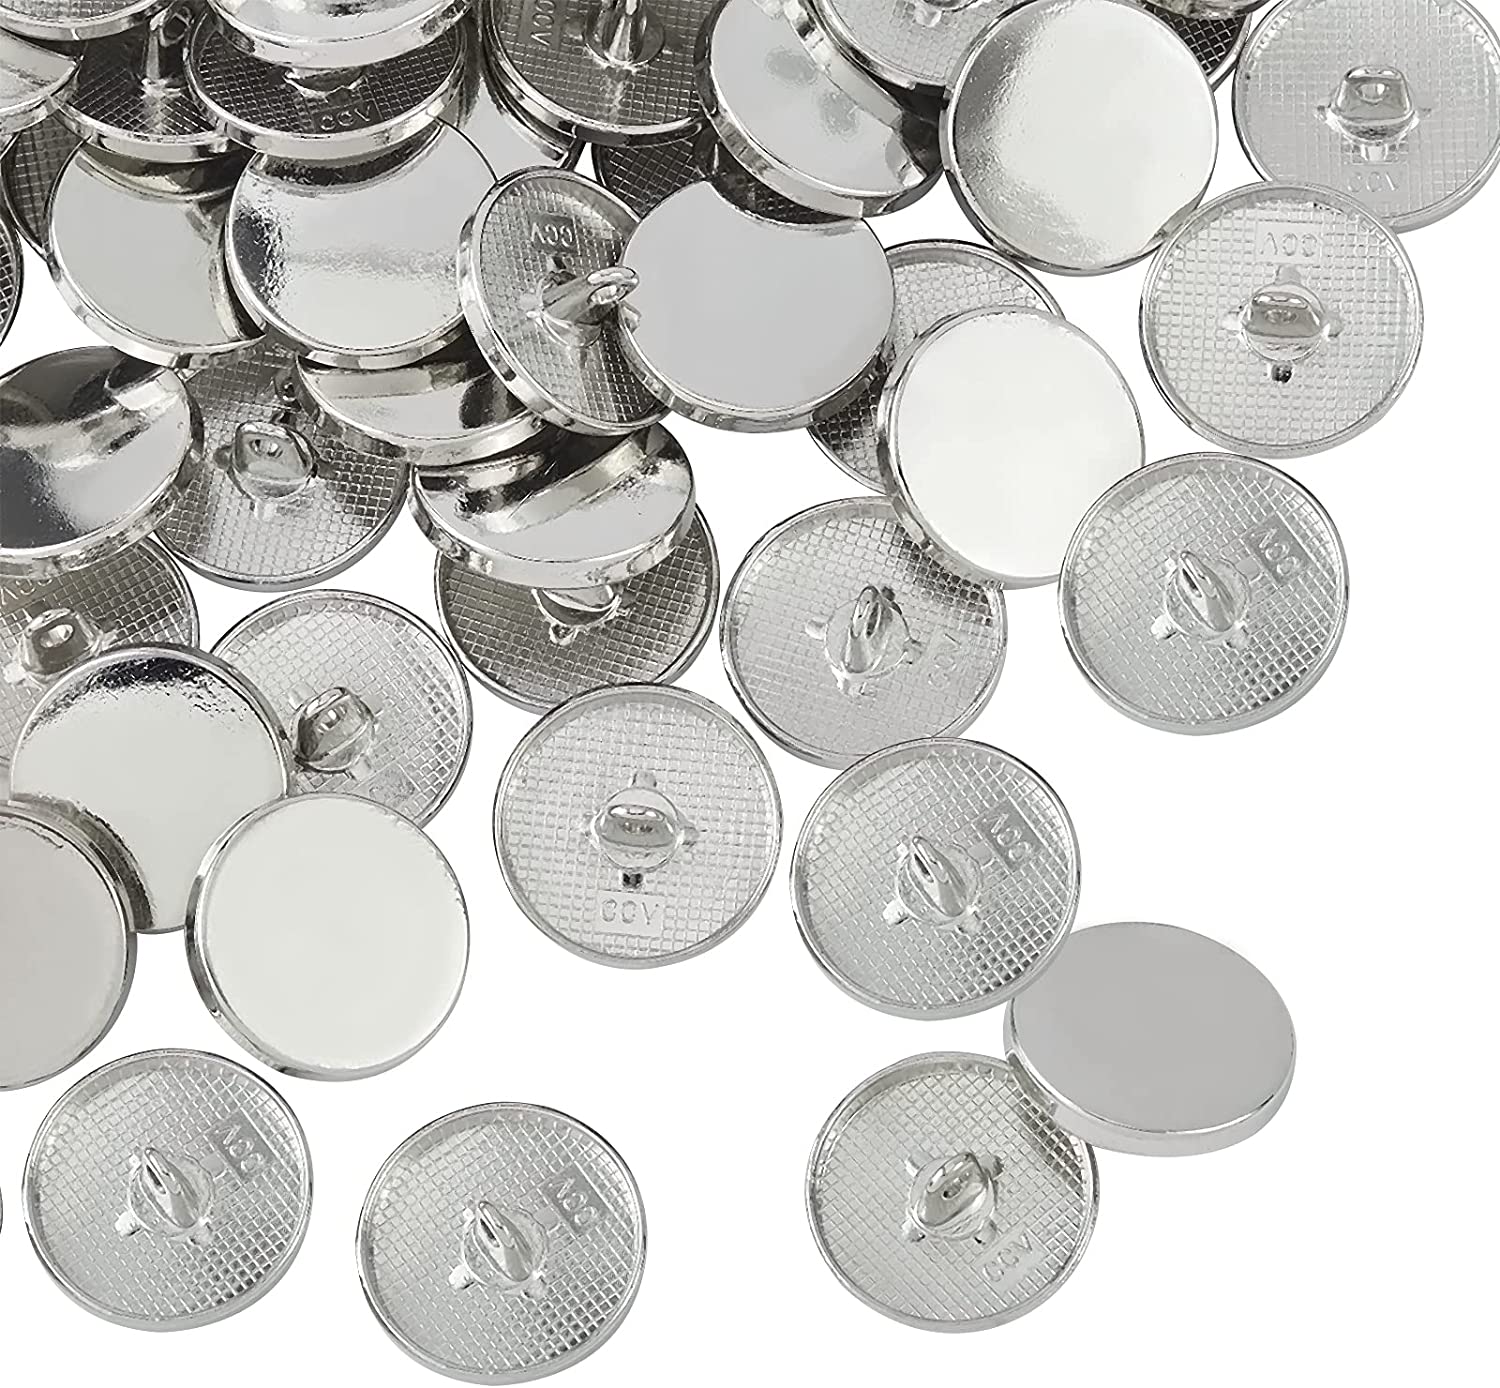 100pcs 20mm Metal Flat Buttons Alloy Shank Buttons for Sewing DIY Crafts  and Jewelry Making - Platinum